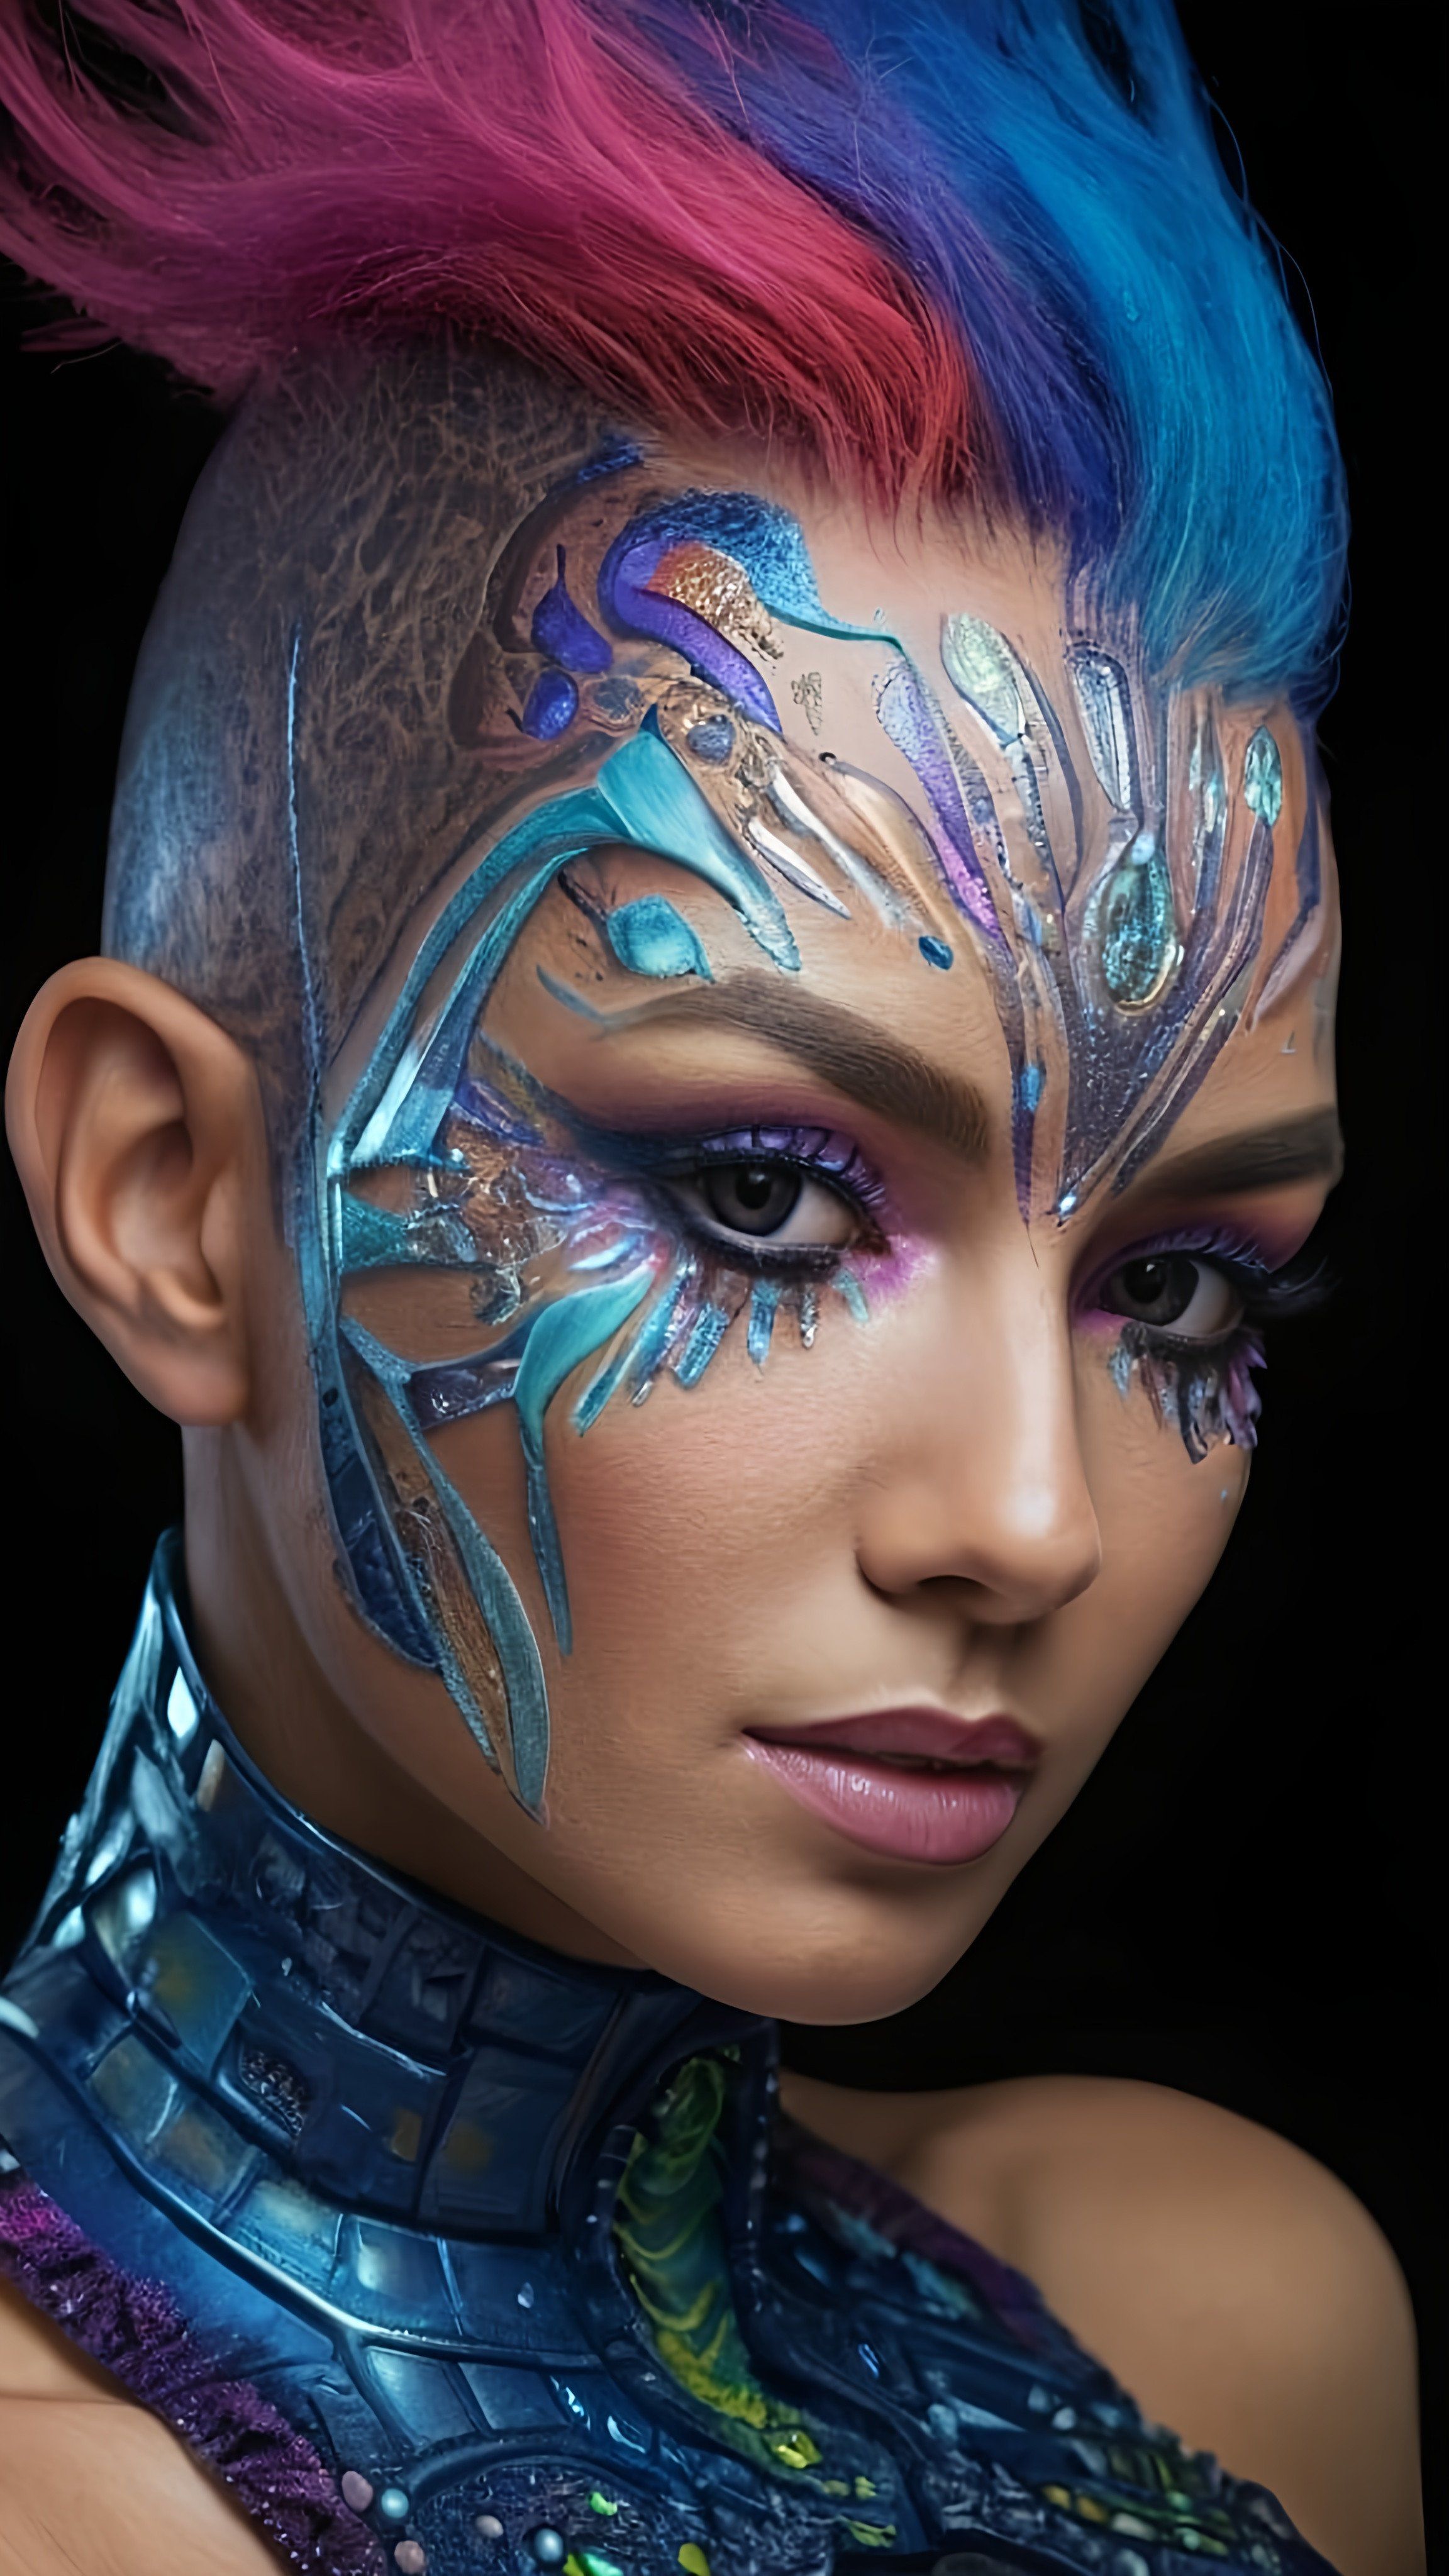 Prompt: a woman with a blue and pink hair and face paint on her face and chest, with a dragon design on her face, fantasy art